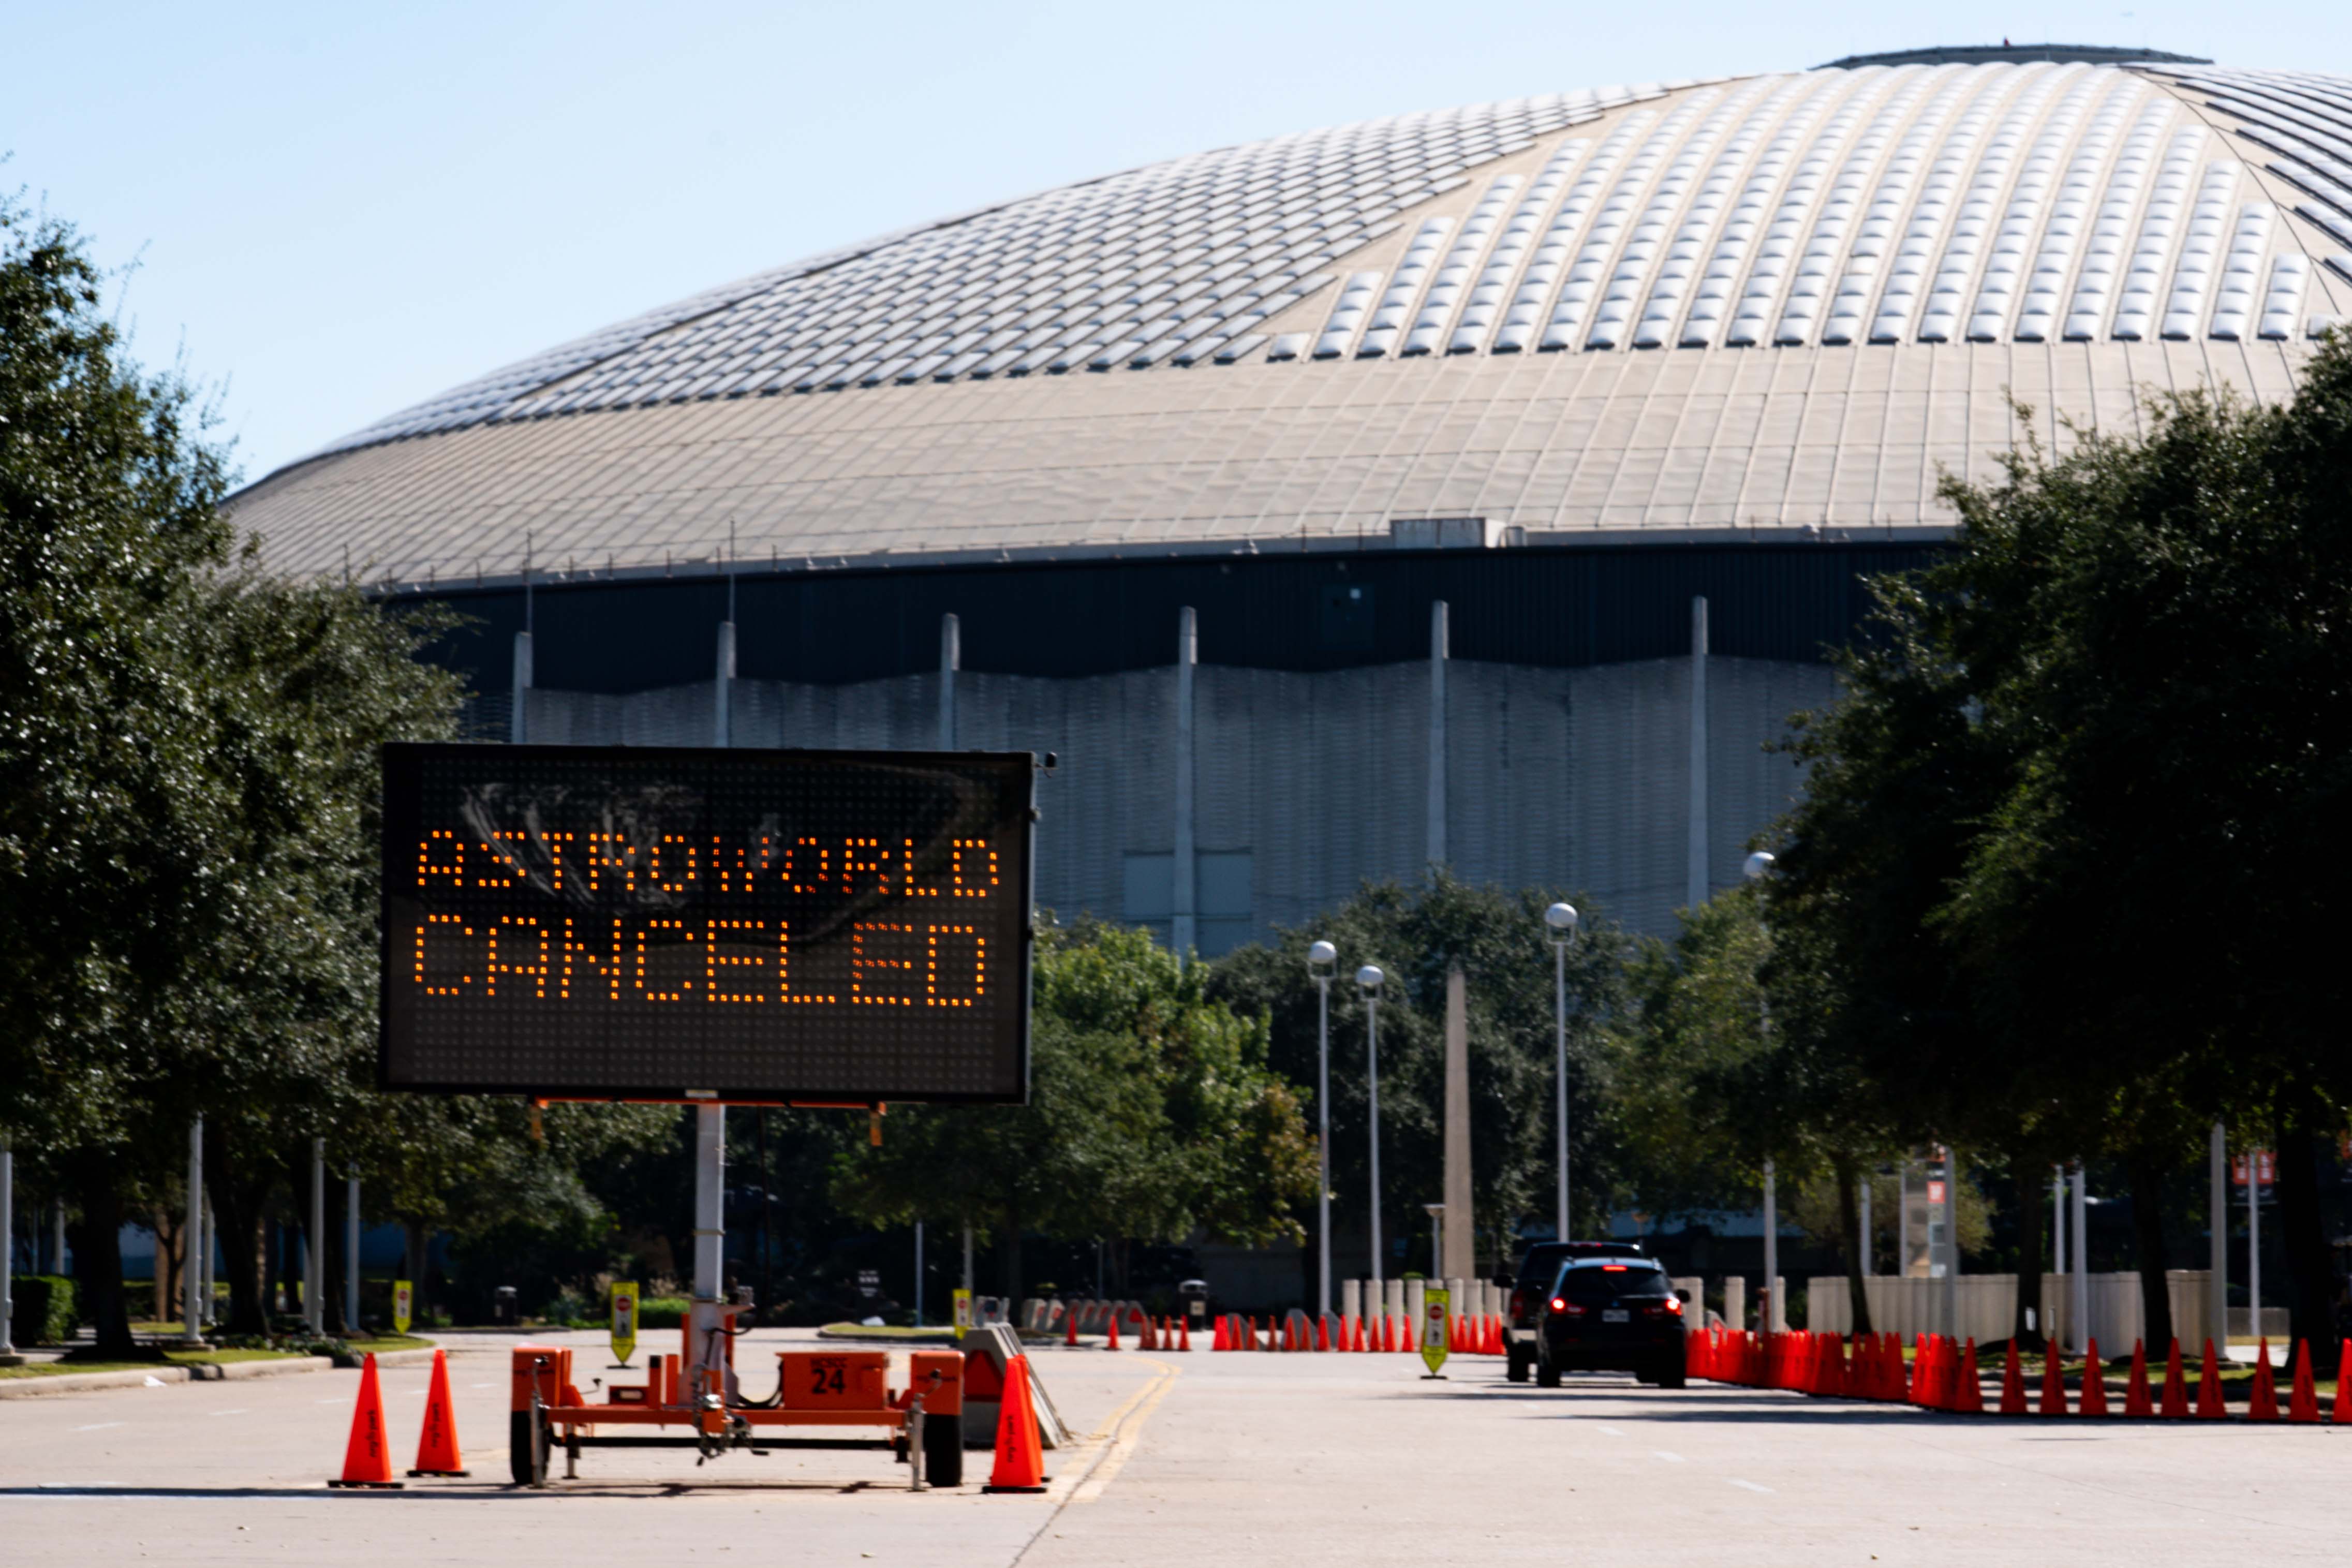 Travis Scott Didn’t Have The Authority To Stop Astroworld Concert, Spokesperson Says